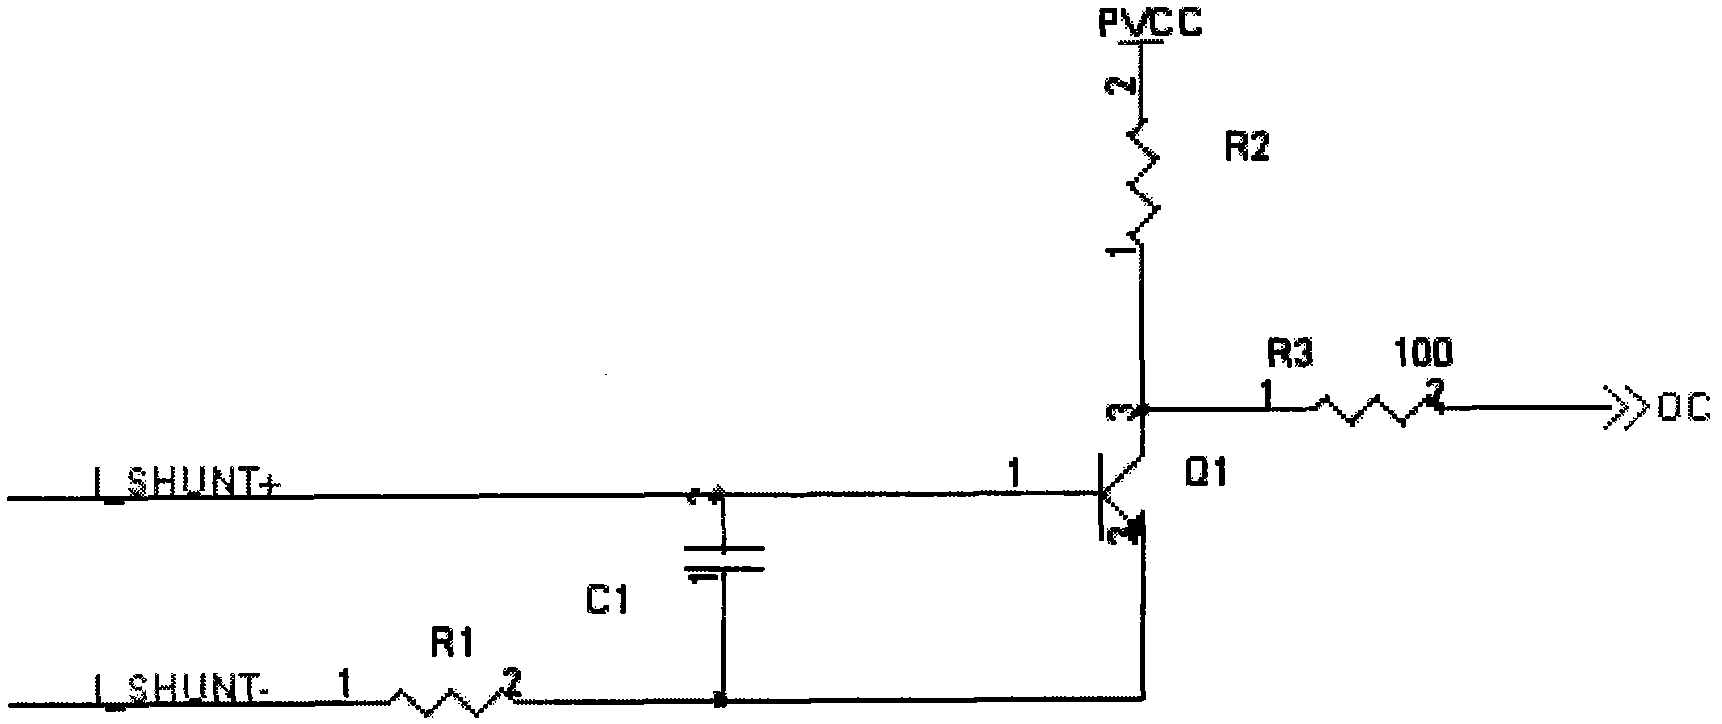 Over-current or short-circuit state detection circuit of insulated gate bipolar transistor (IGBT)